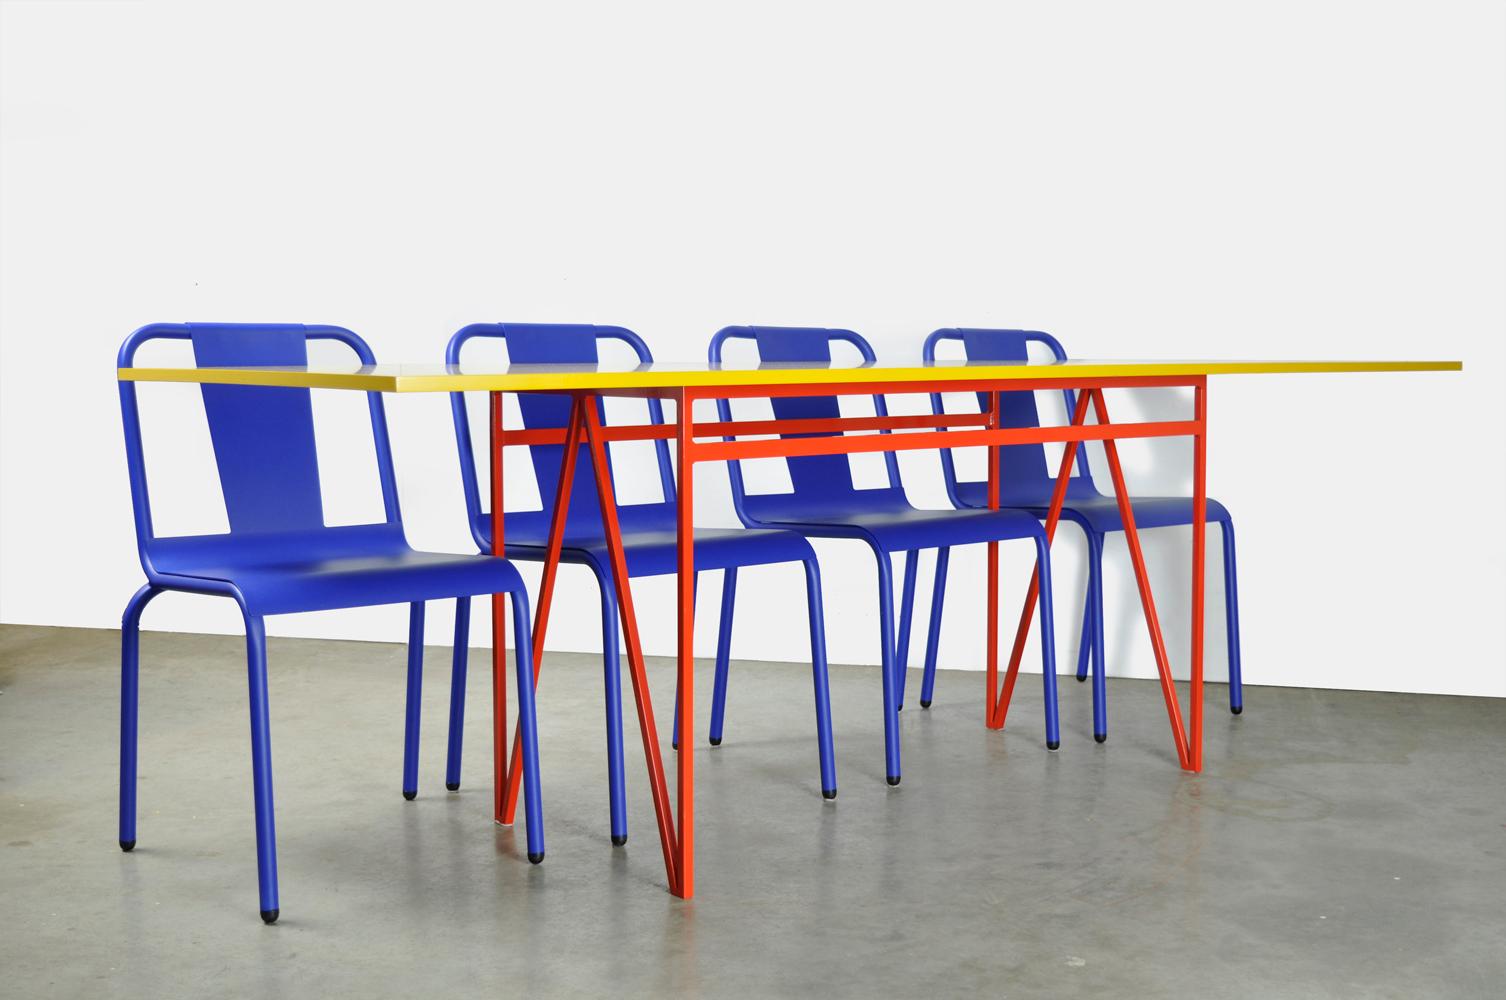 Set of 6 Design Chairs by Isi Design Group, Produced by Isimar, 2000 Spain 9